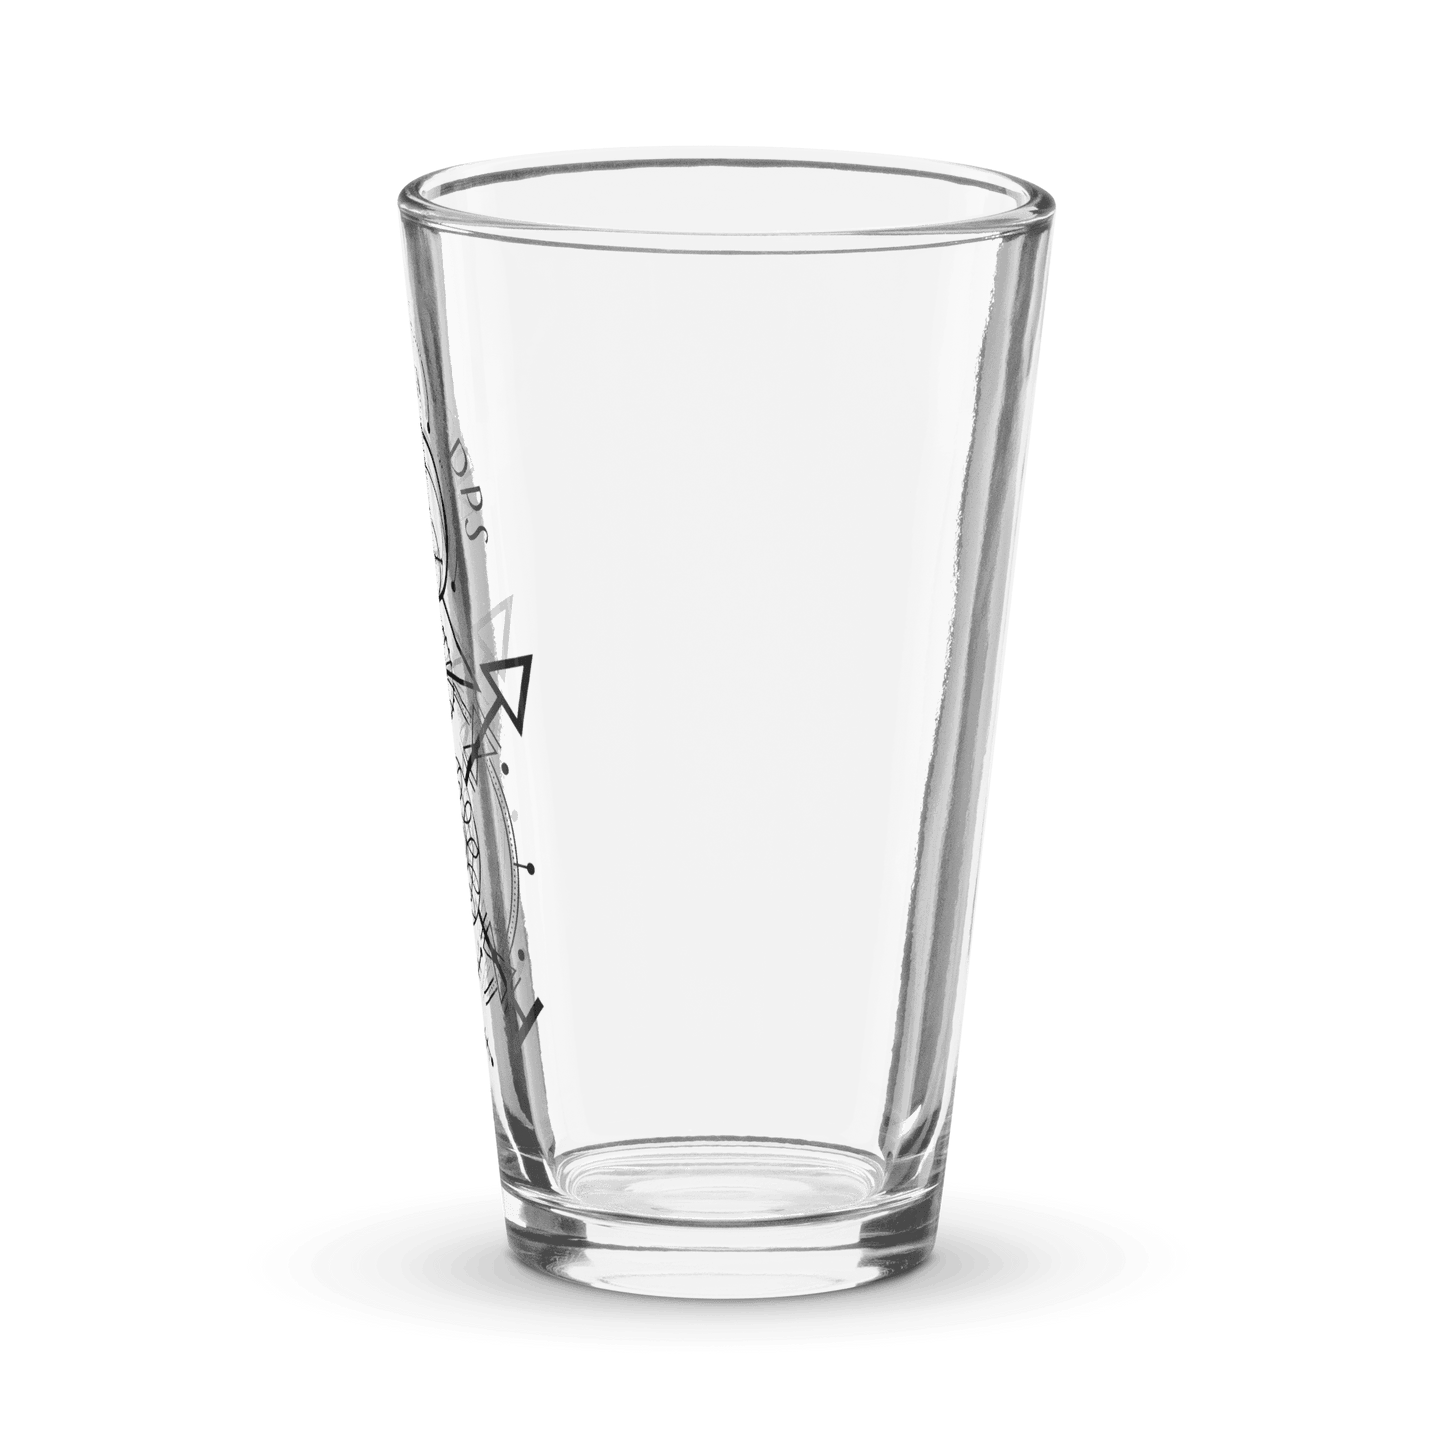 Marksman Shaker Pint Glass for ADC's, DPS'ers, and FPS Fans